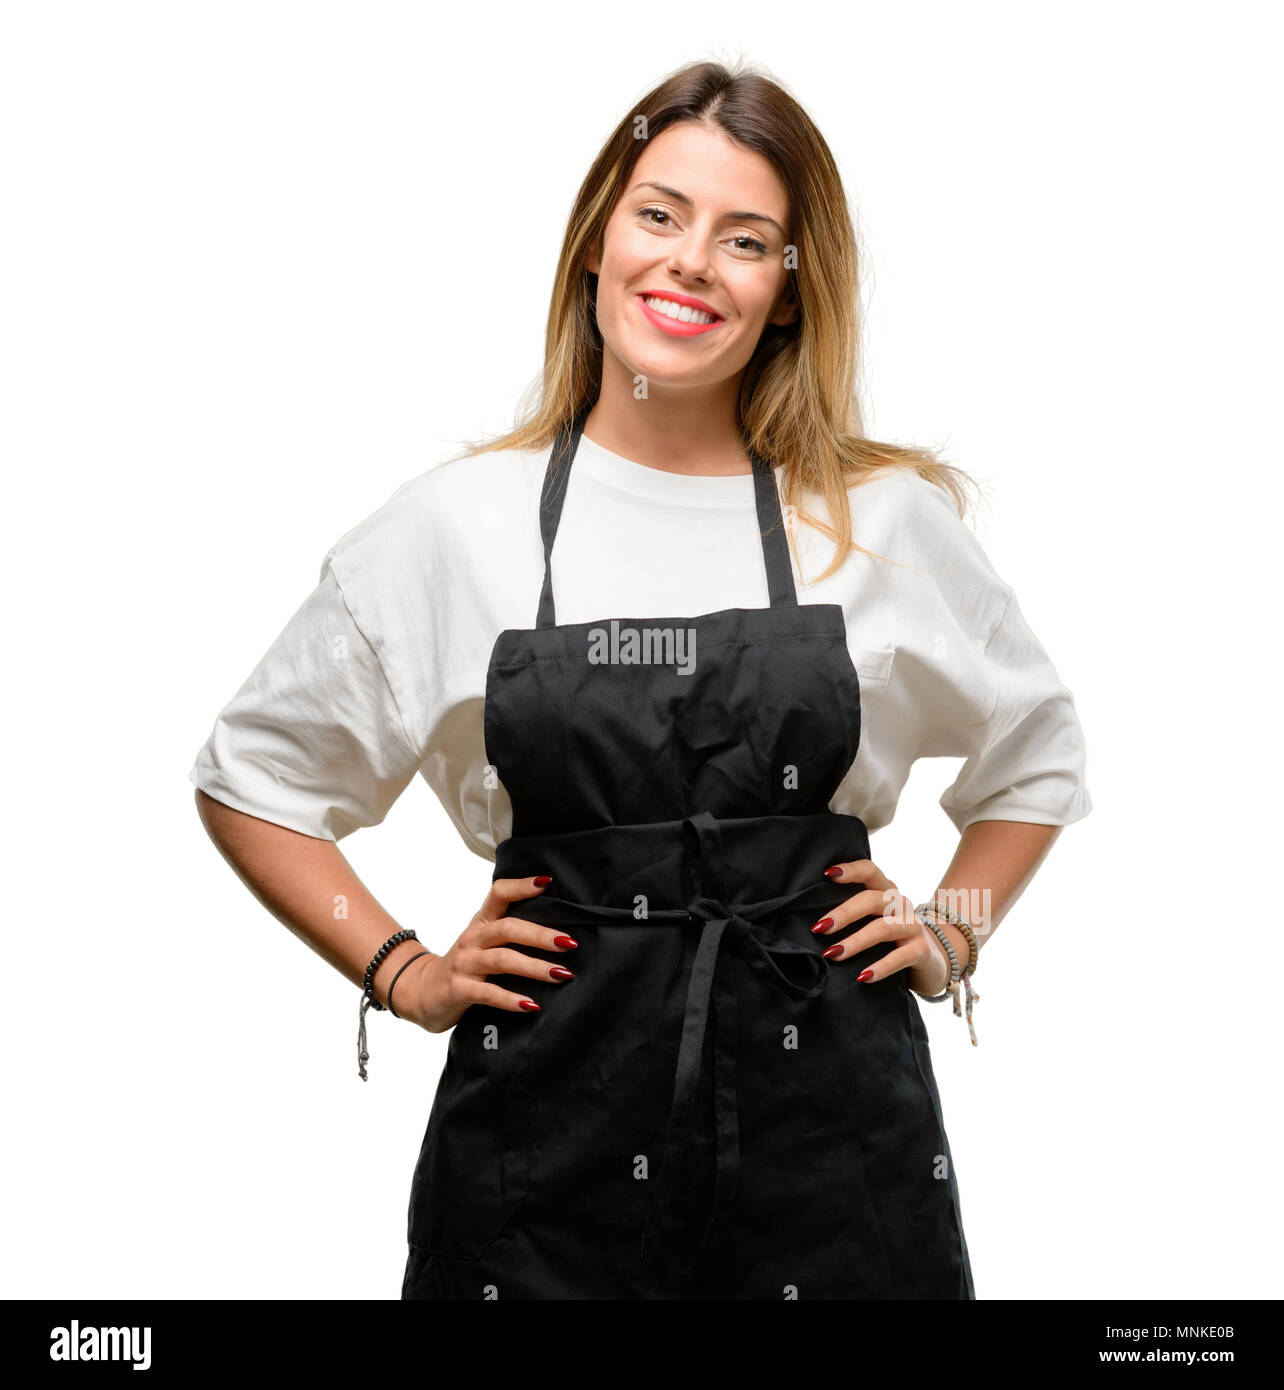 Shop owner woman wearing apron confident and happy with a big natural smile laughing Stock Photo